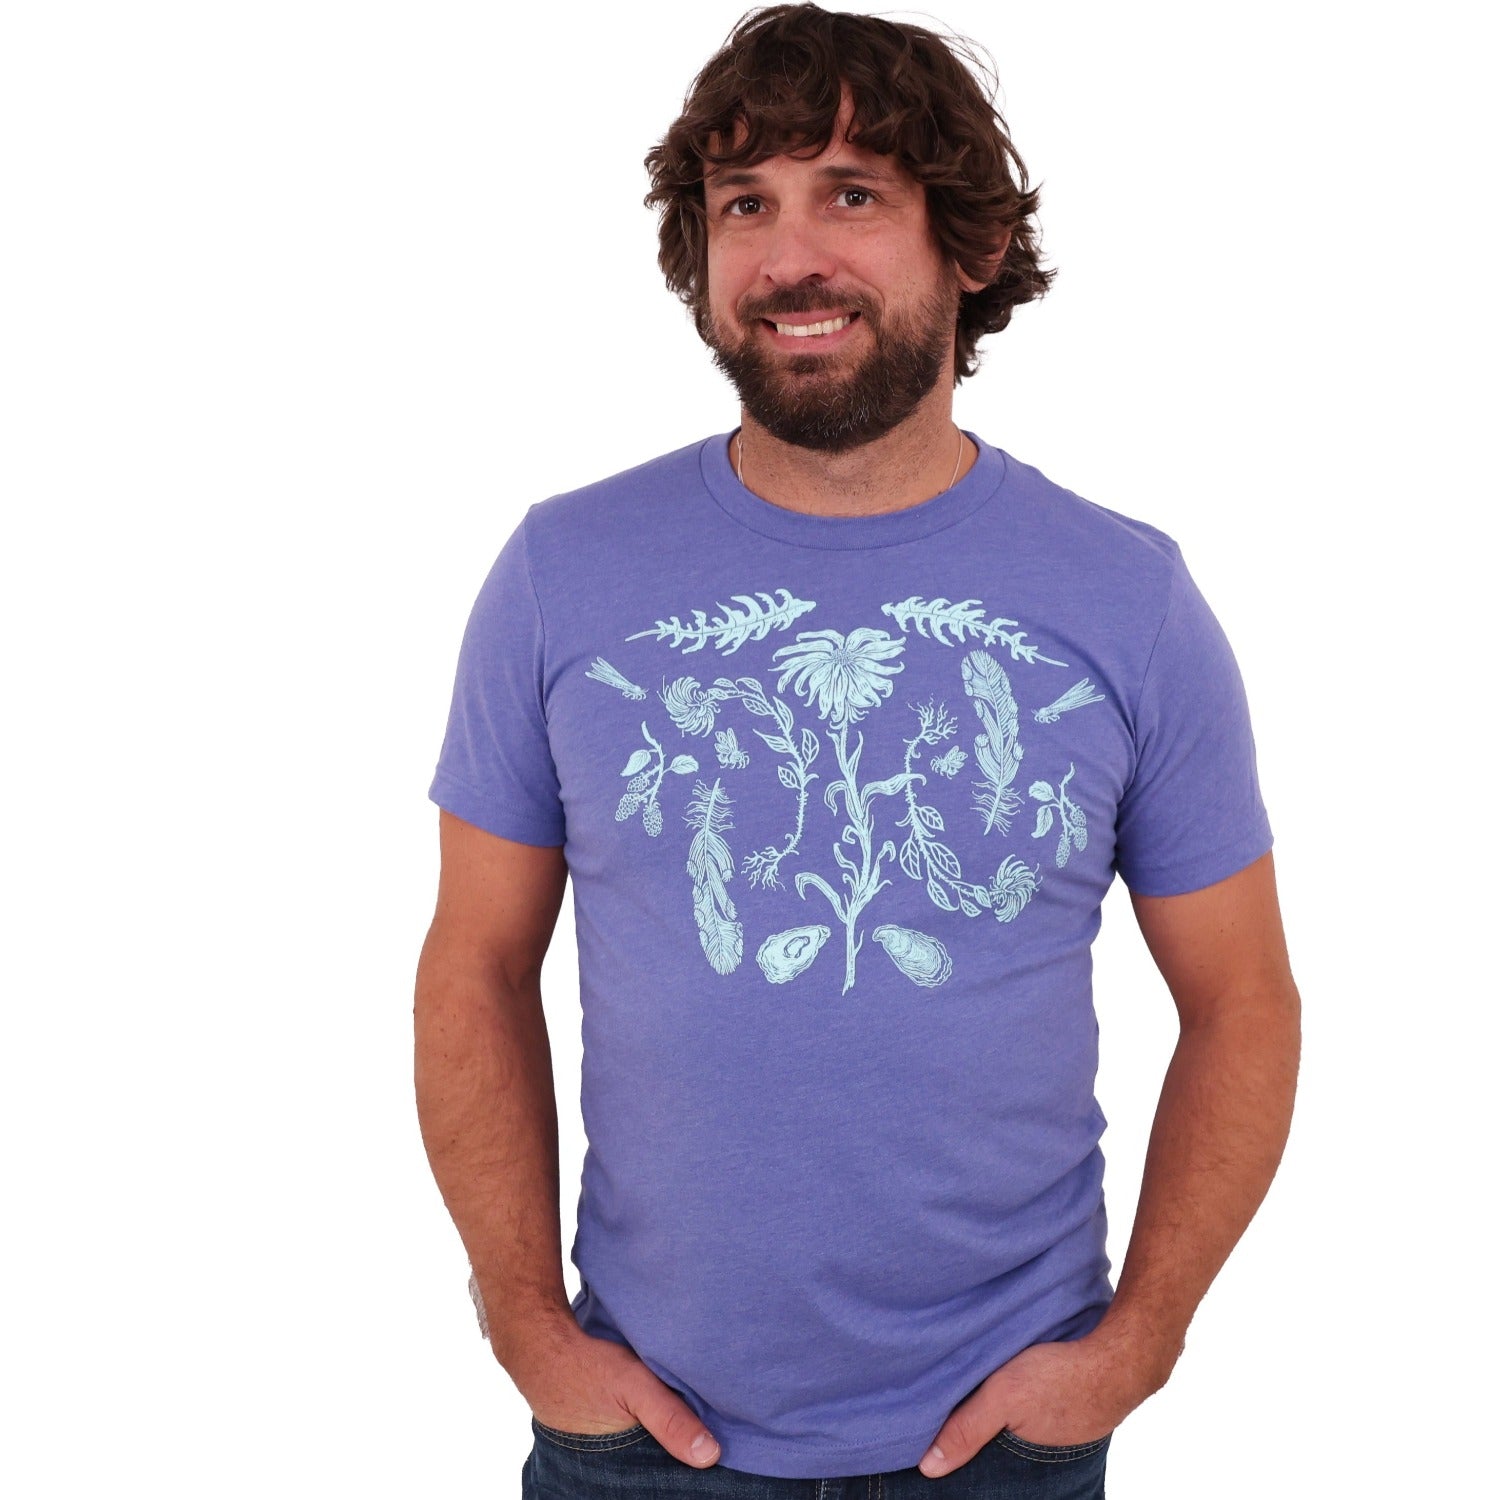 Man wearing a light purple colored t-shirt with light blue ink of flowers, ferns, feathers, shells, etc